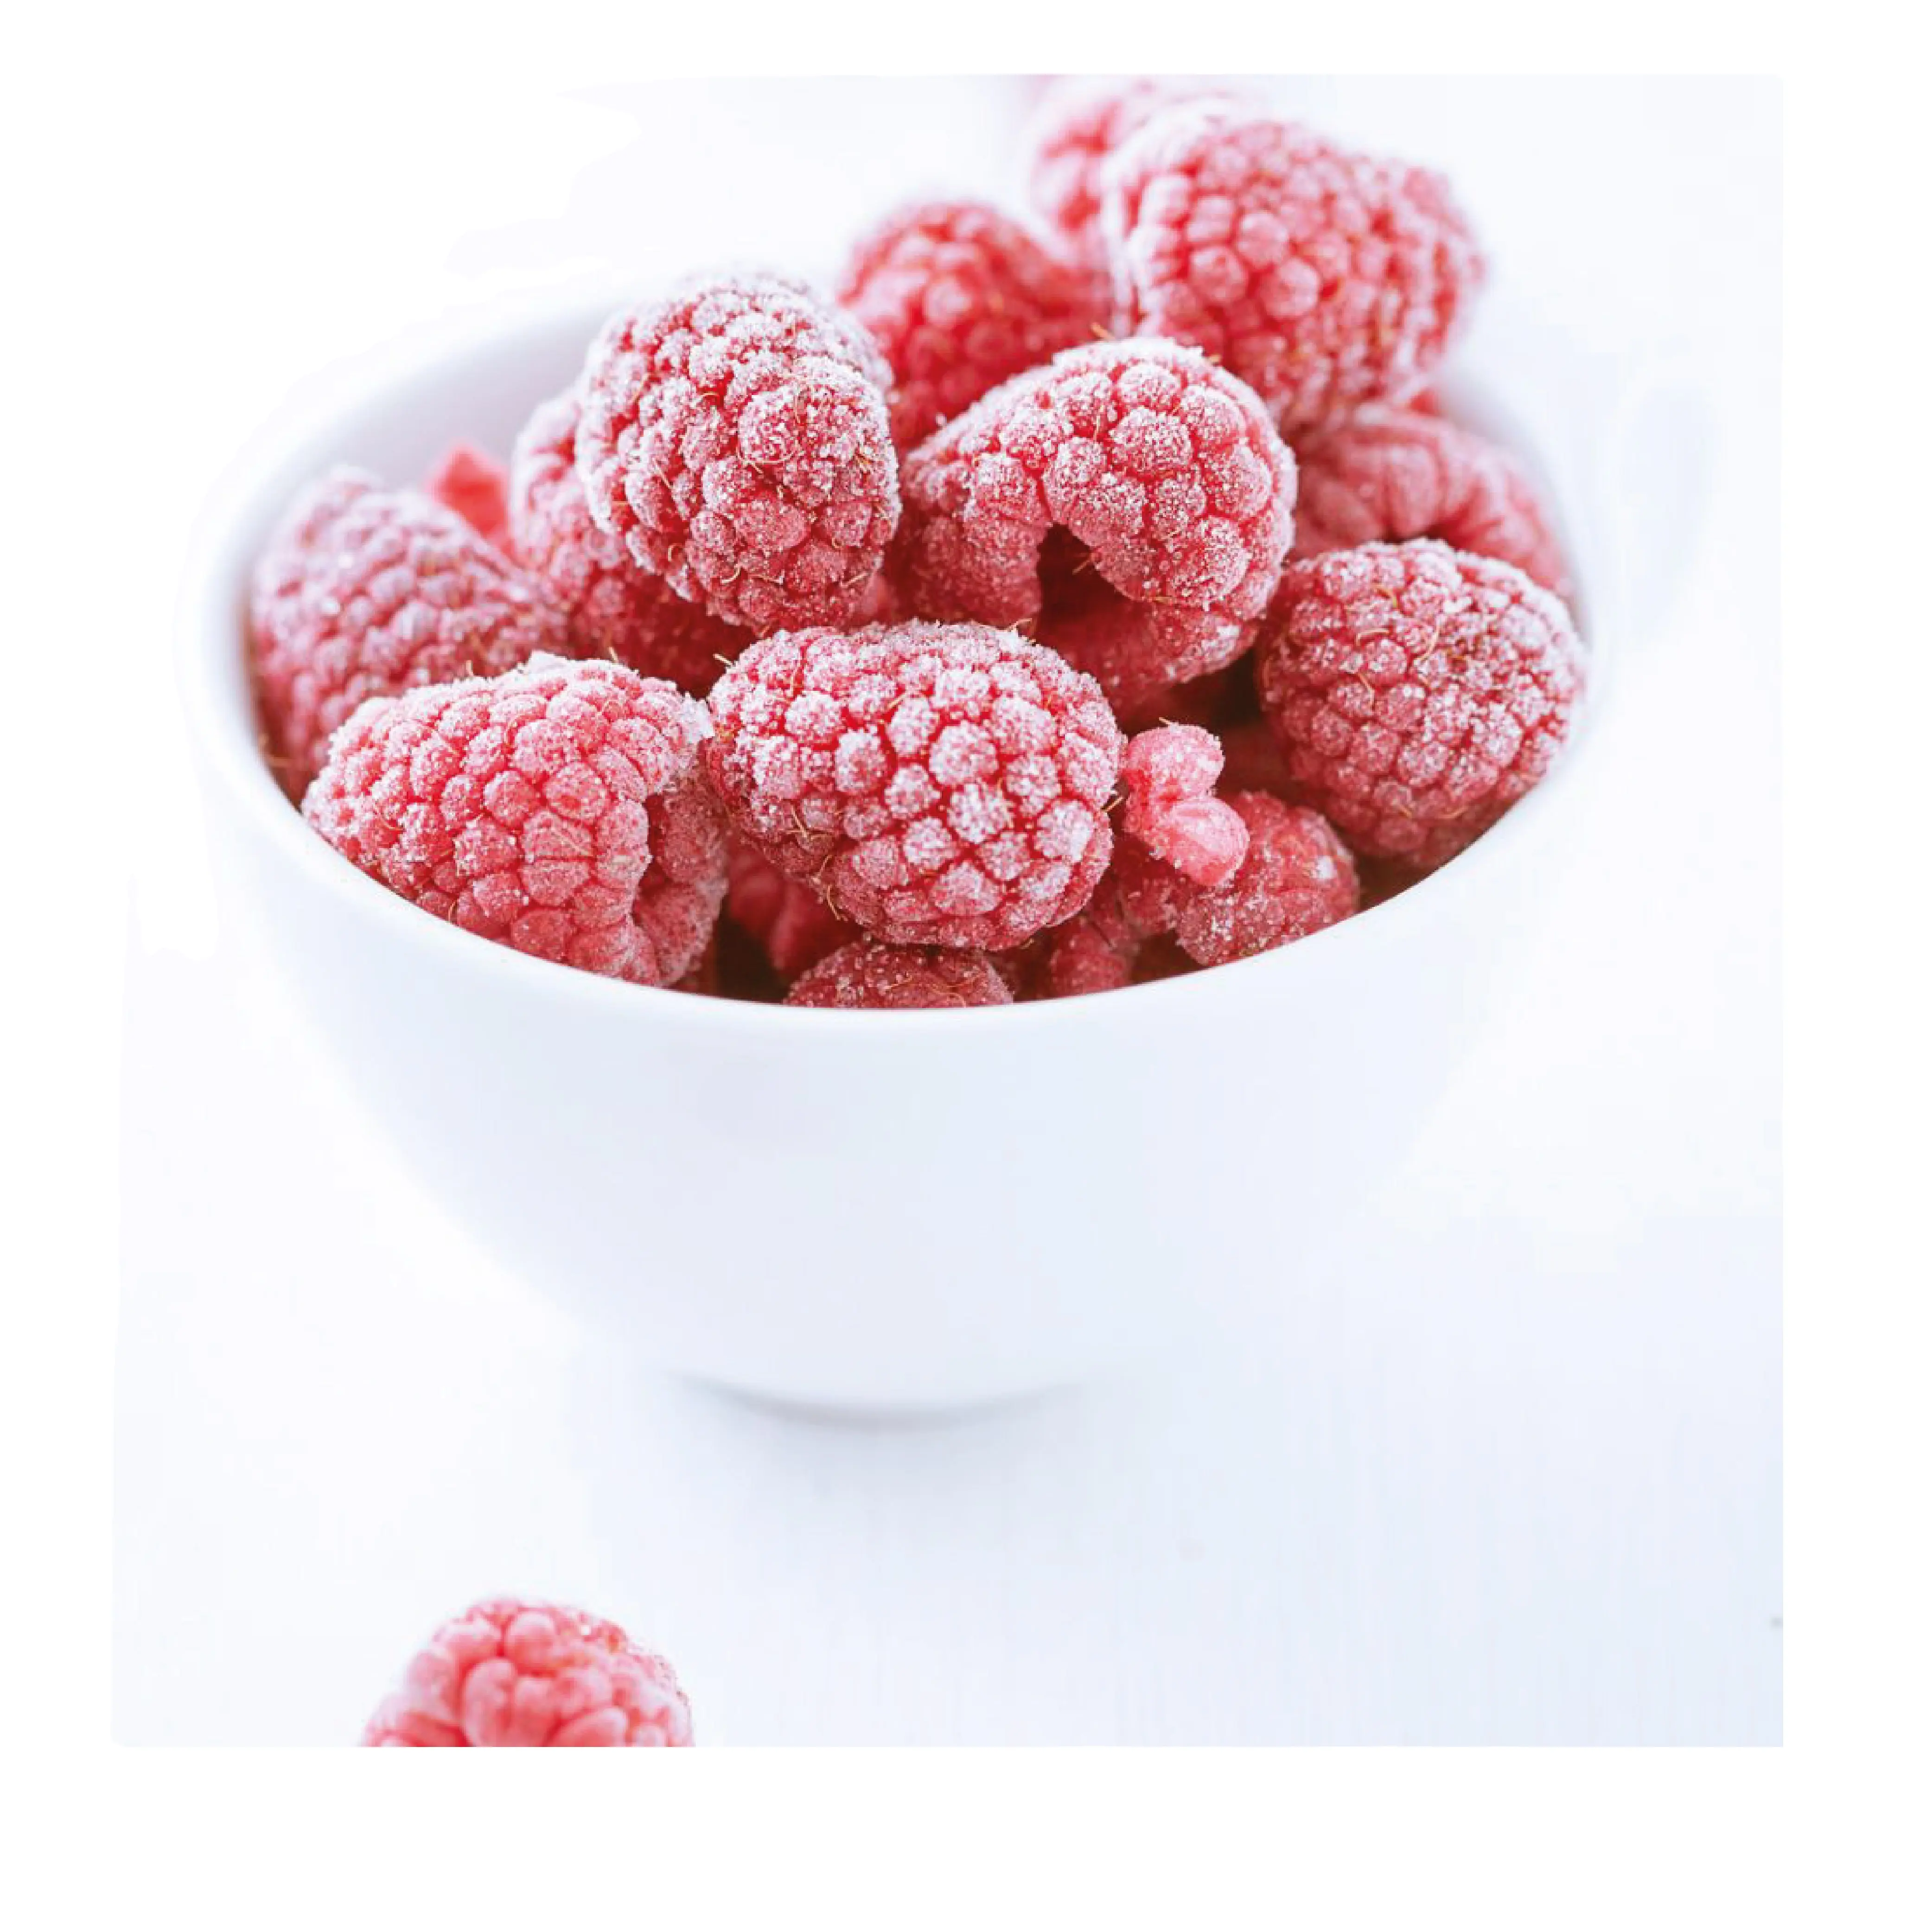 Mare Nostrum Frozen Wild Raspberries Whole & Crumble Pesticide Free with Best Taste Hot Seller Good Quality Fresh Fruits